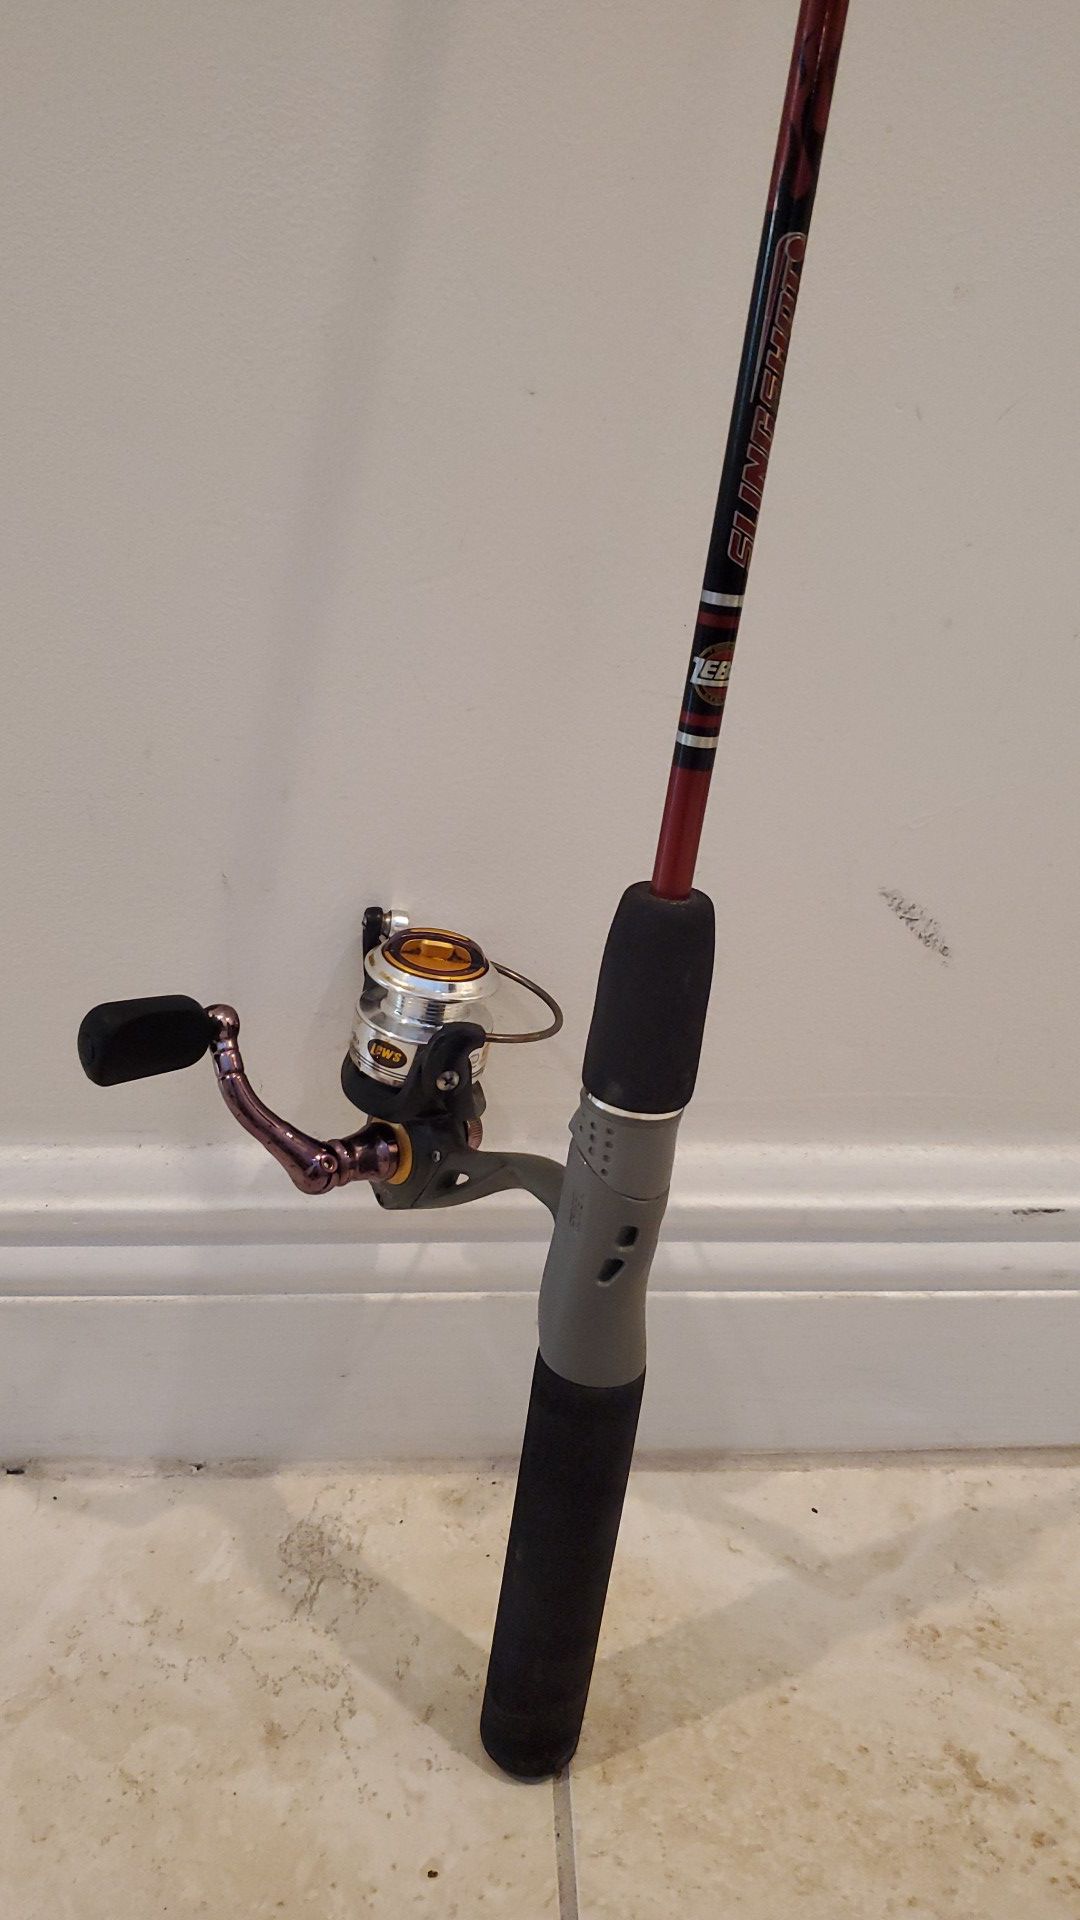 Light Zebco fishing rod and Lews reel combo with Shakespeare Tackle box